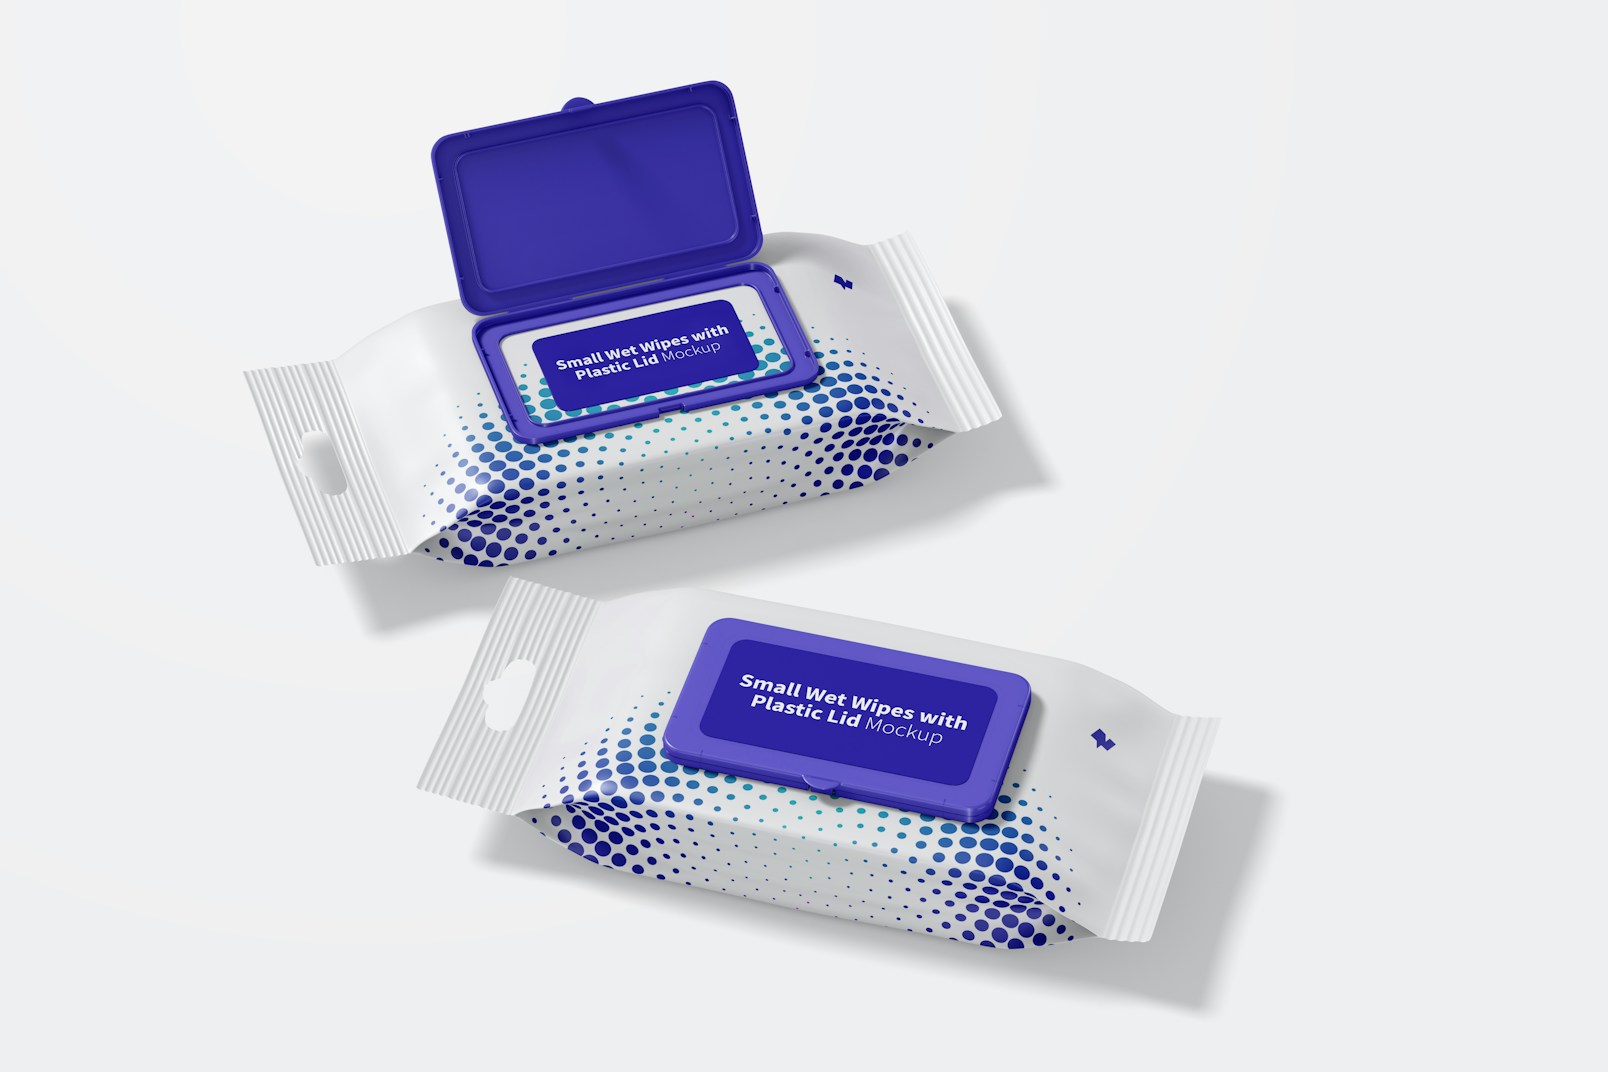 Small Wipes with Plastic Lid Packaging Mockup, Half Side View